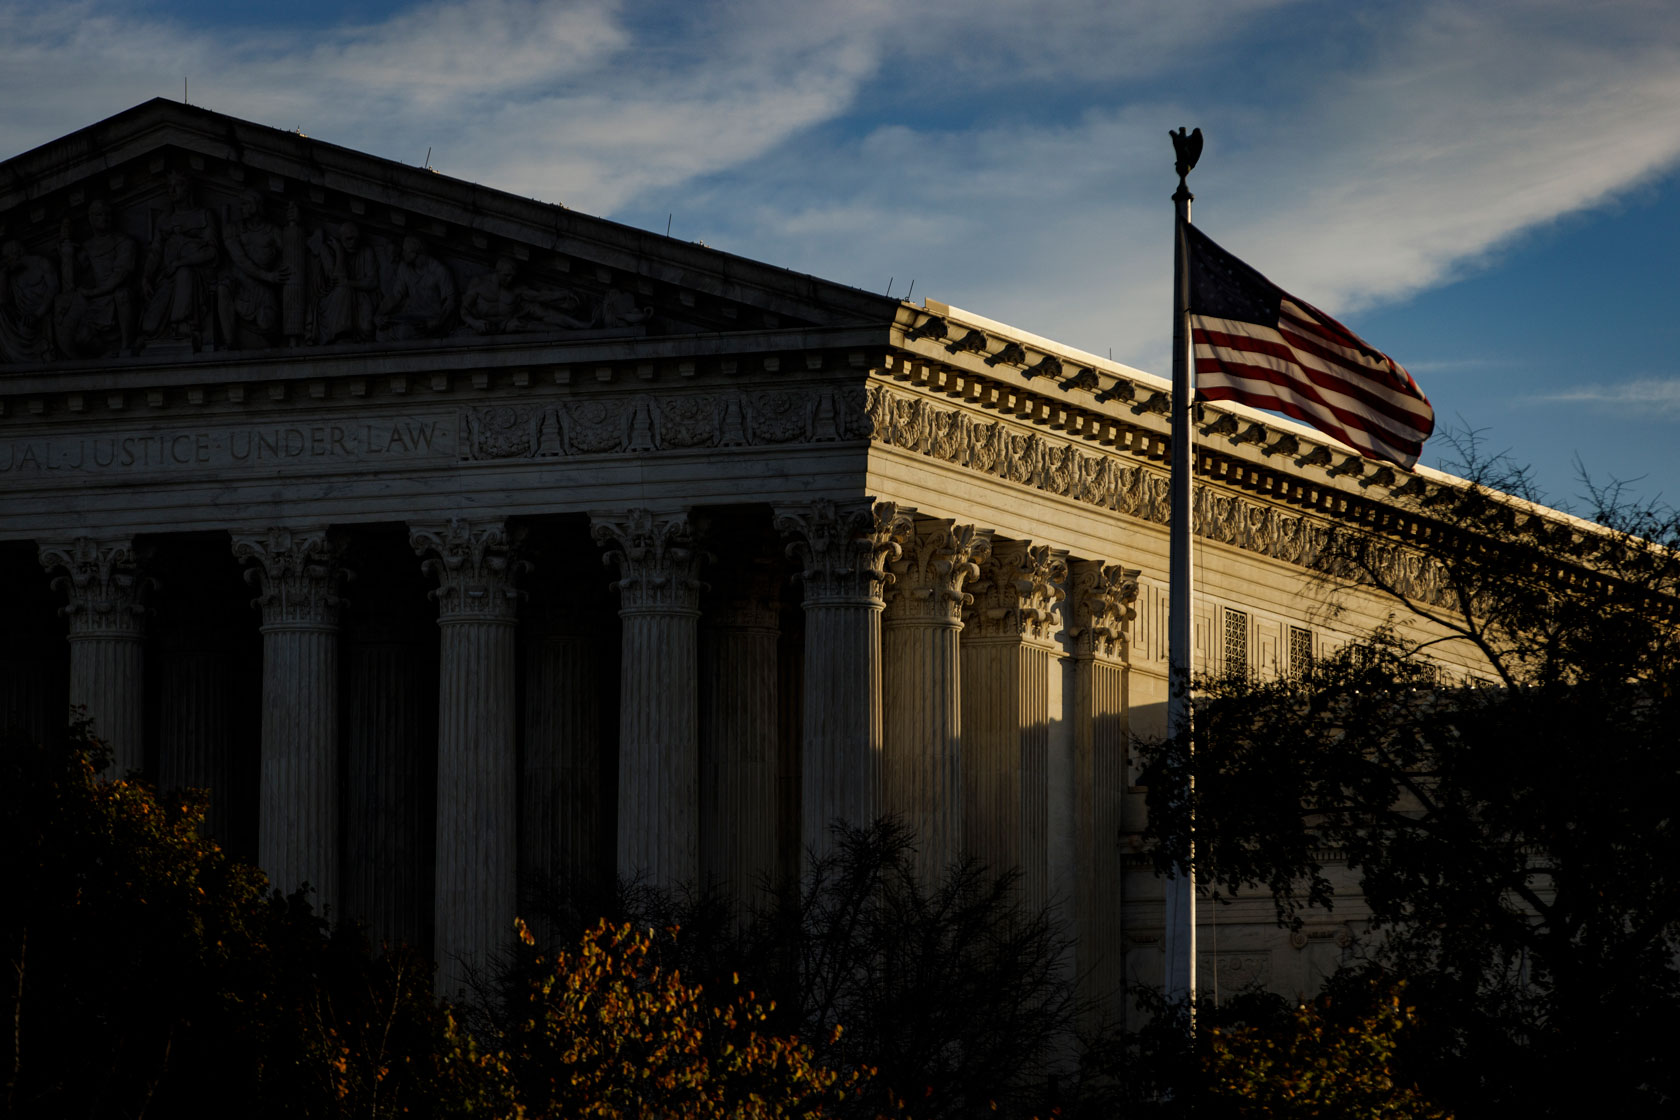 The U.S. Supreme Court building is pictured at sunrise.